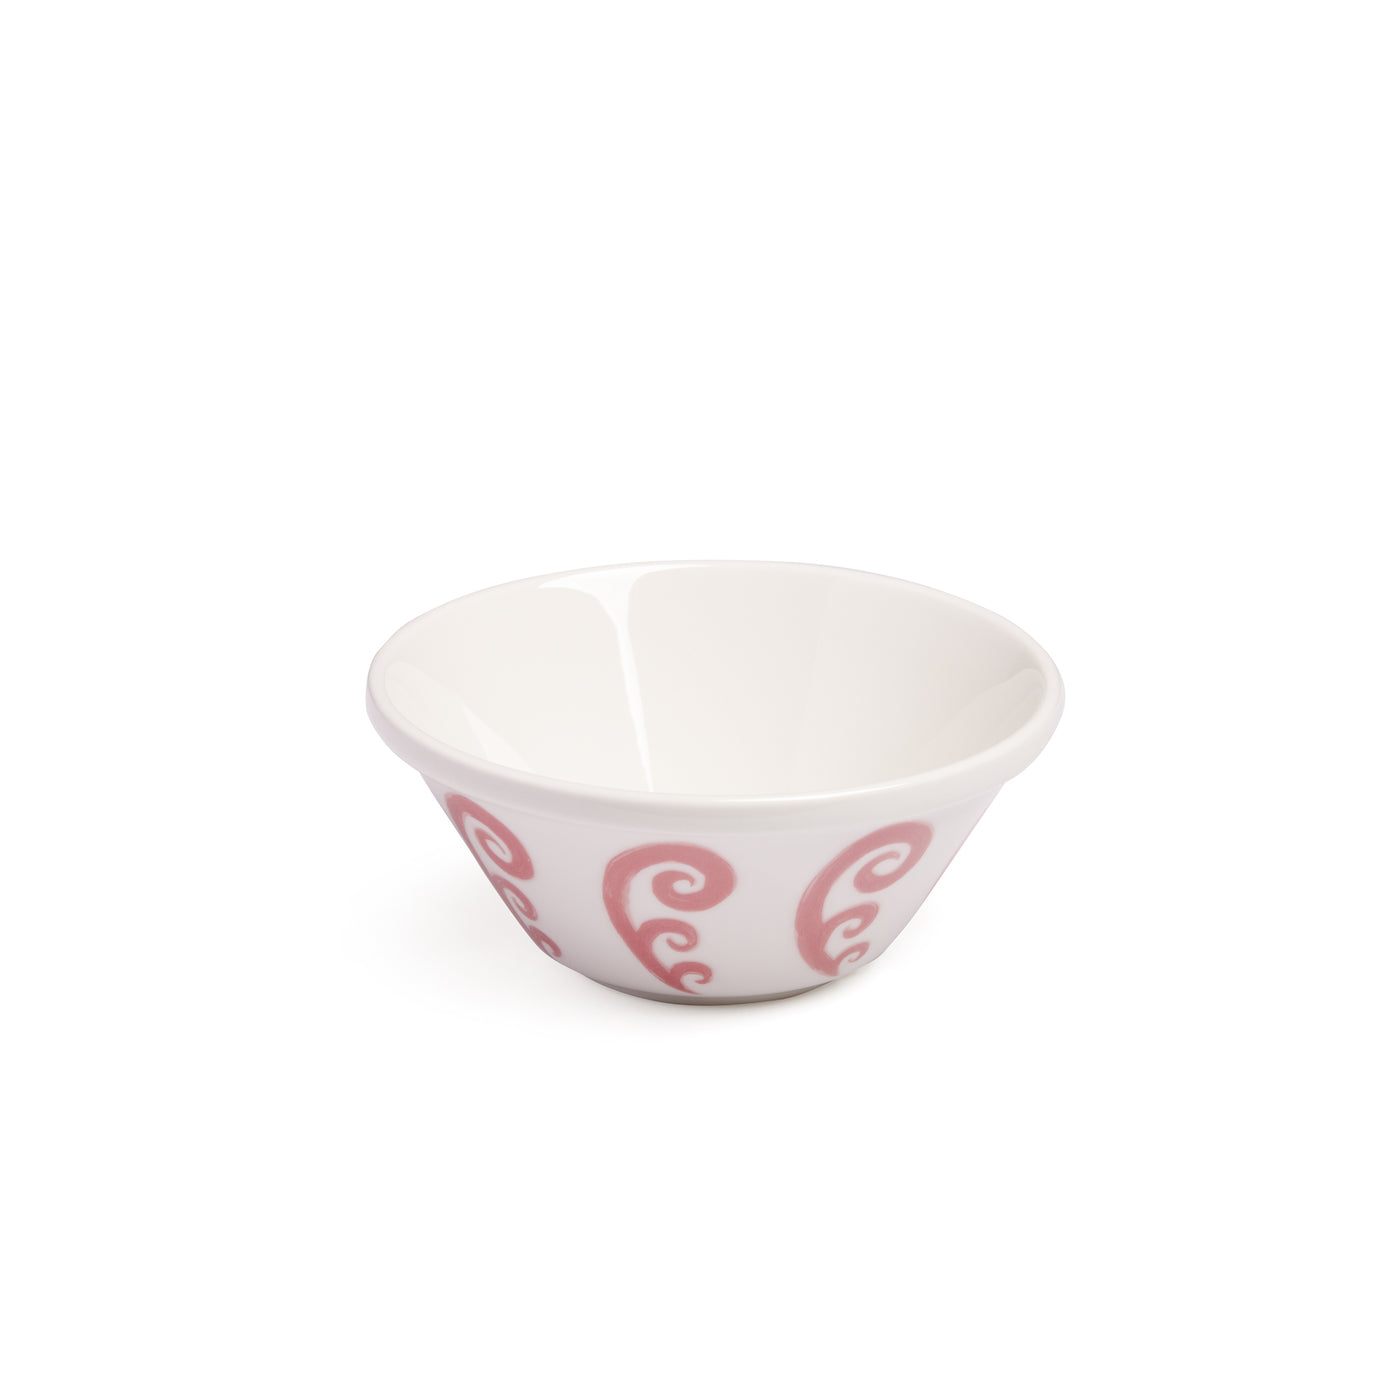 Peacock Cereal Bowl in Pink